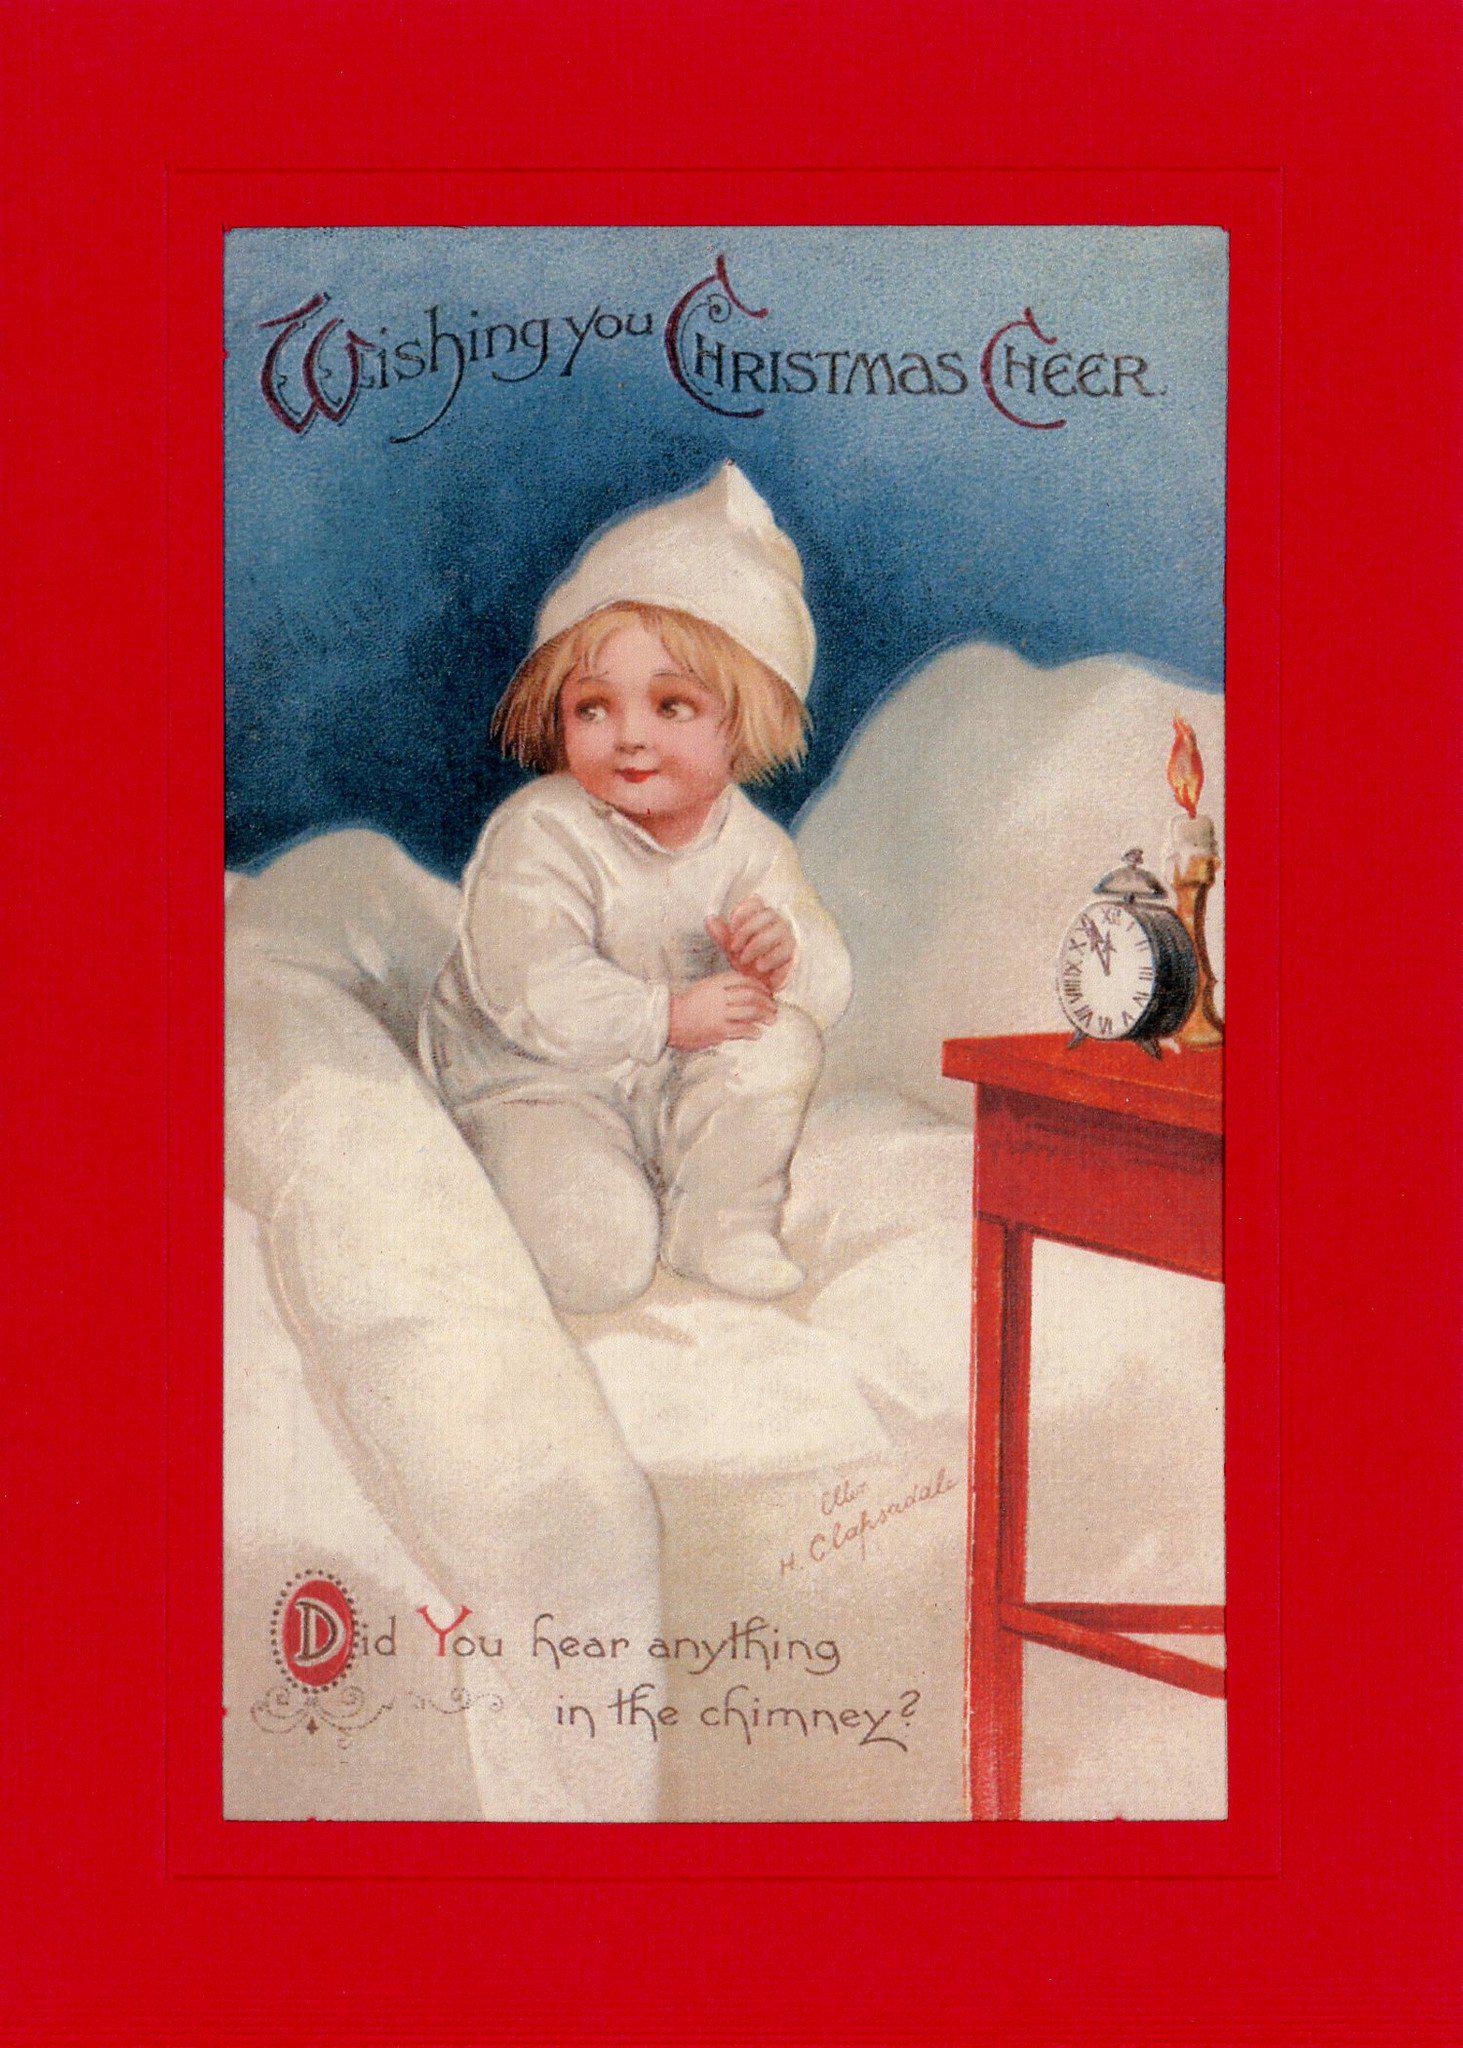 Wishing You Christmas Cheer-Greetings from the Past-Plymouth Cards